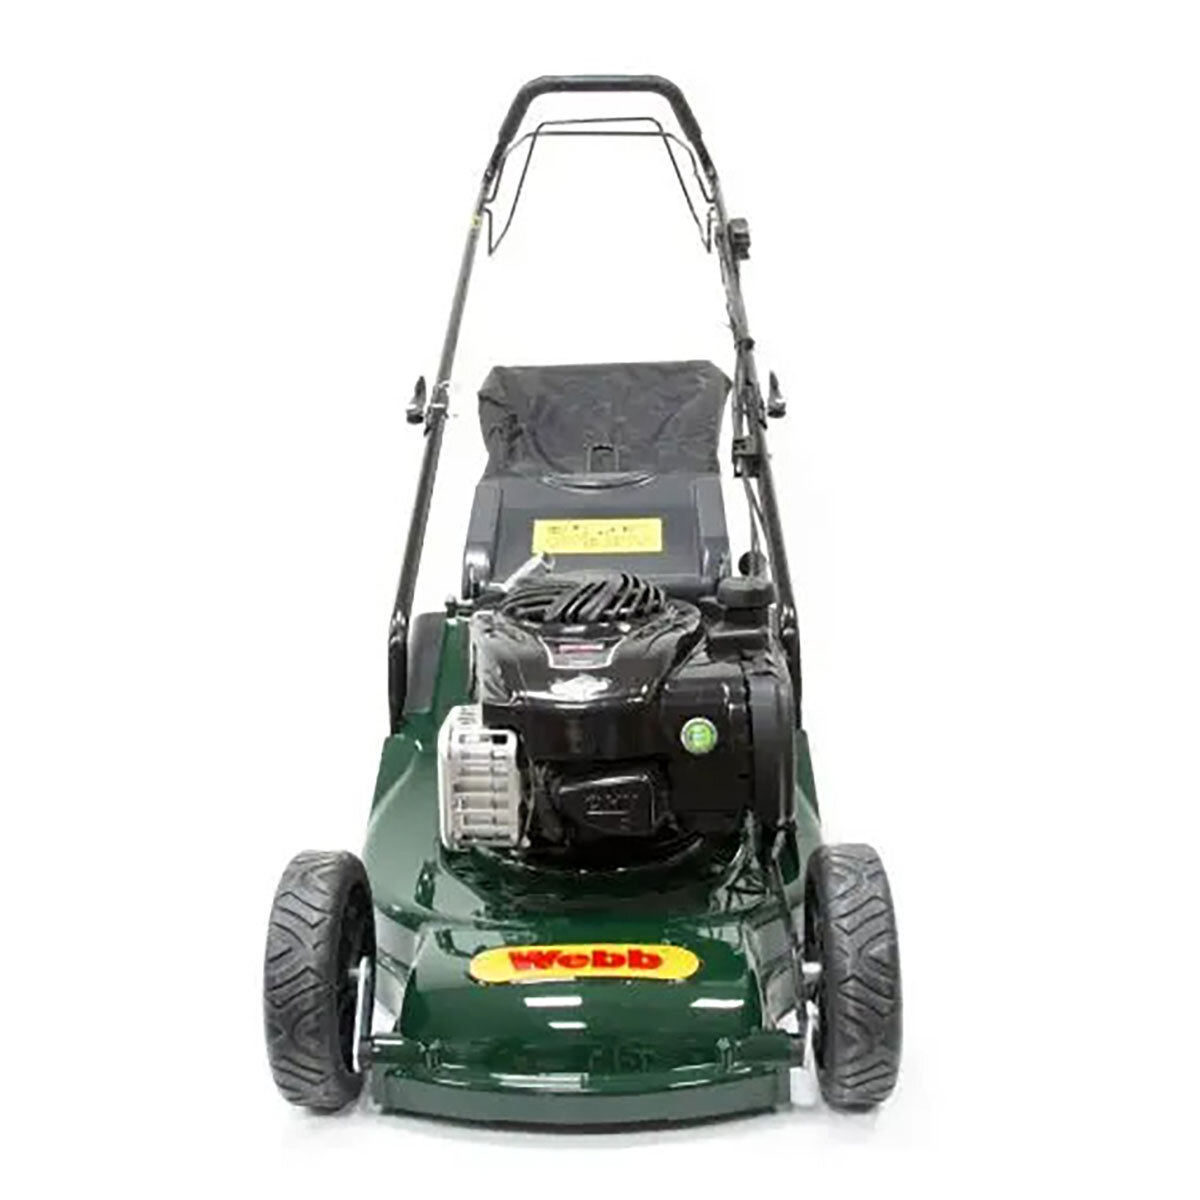 Front of lawnmower